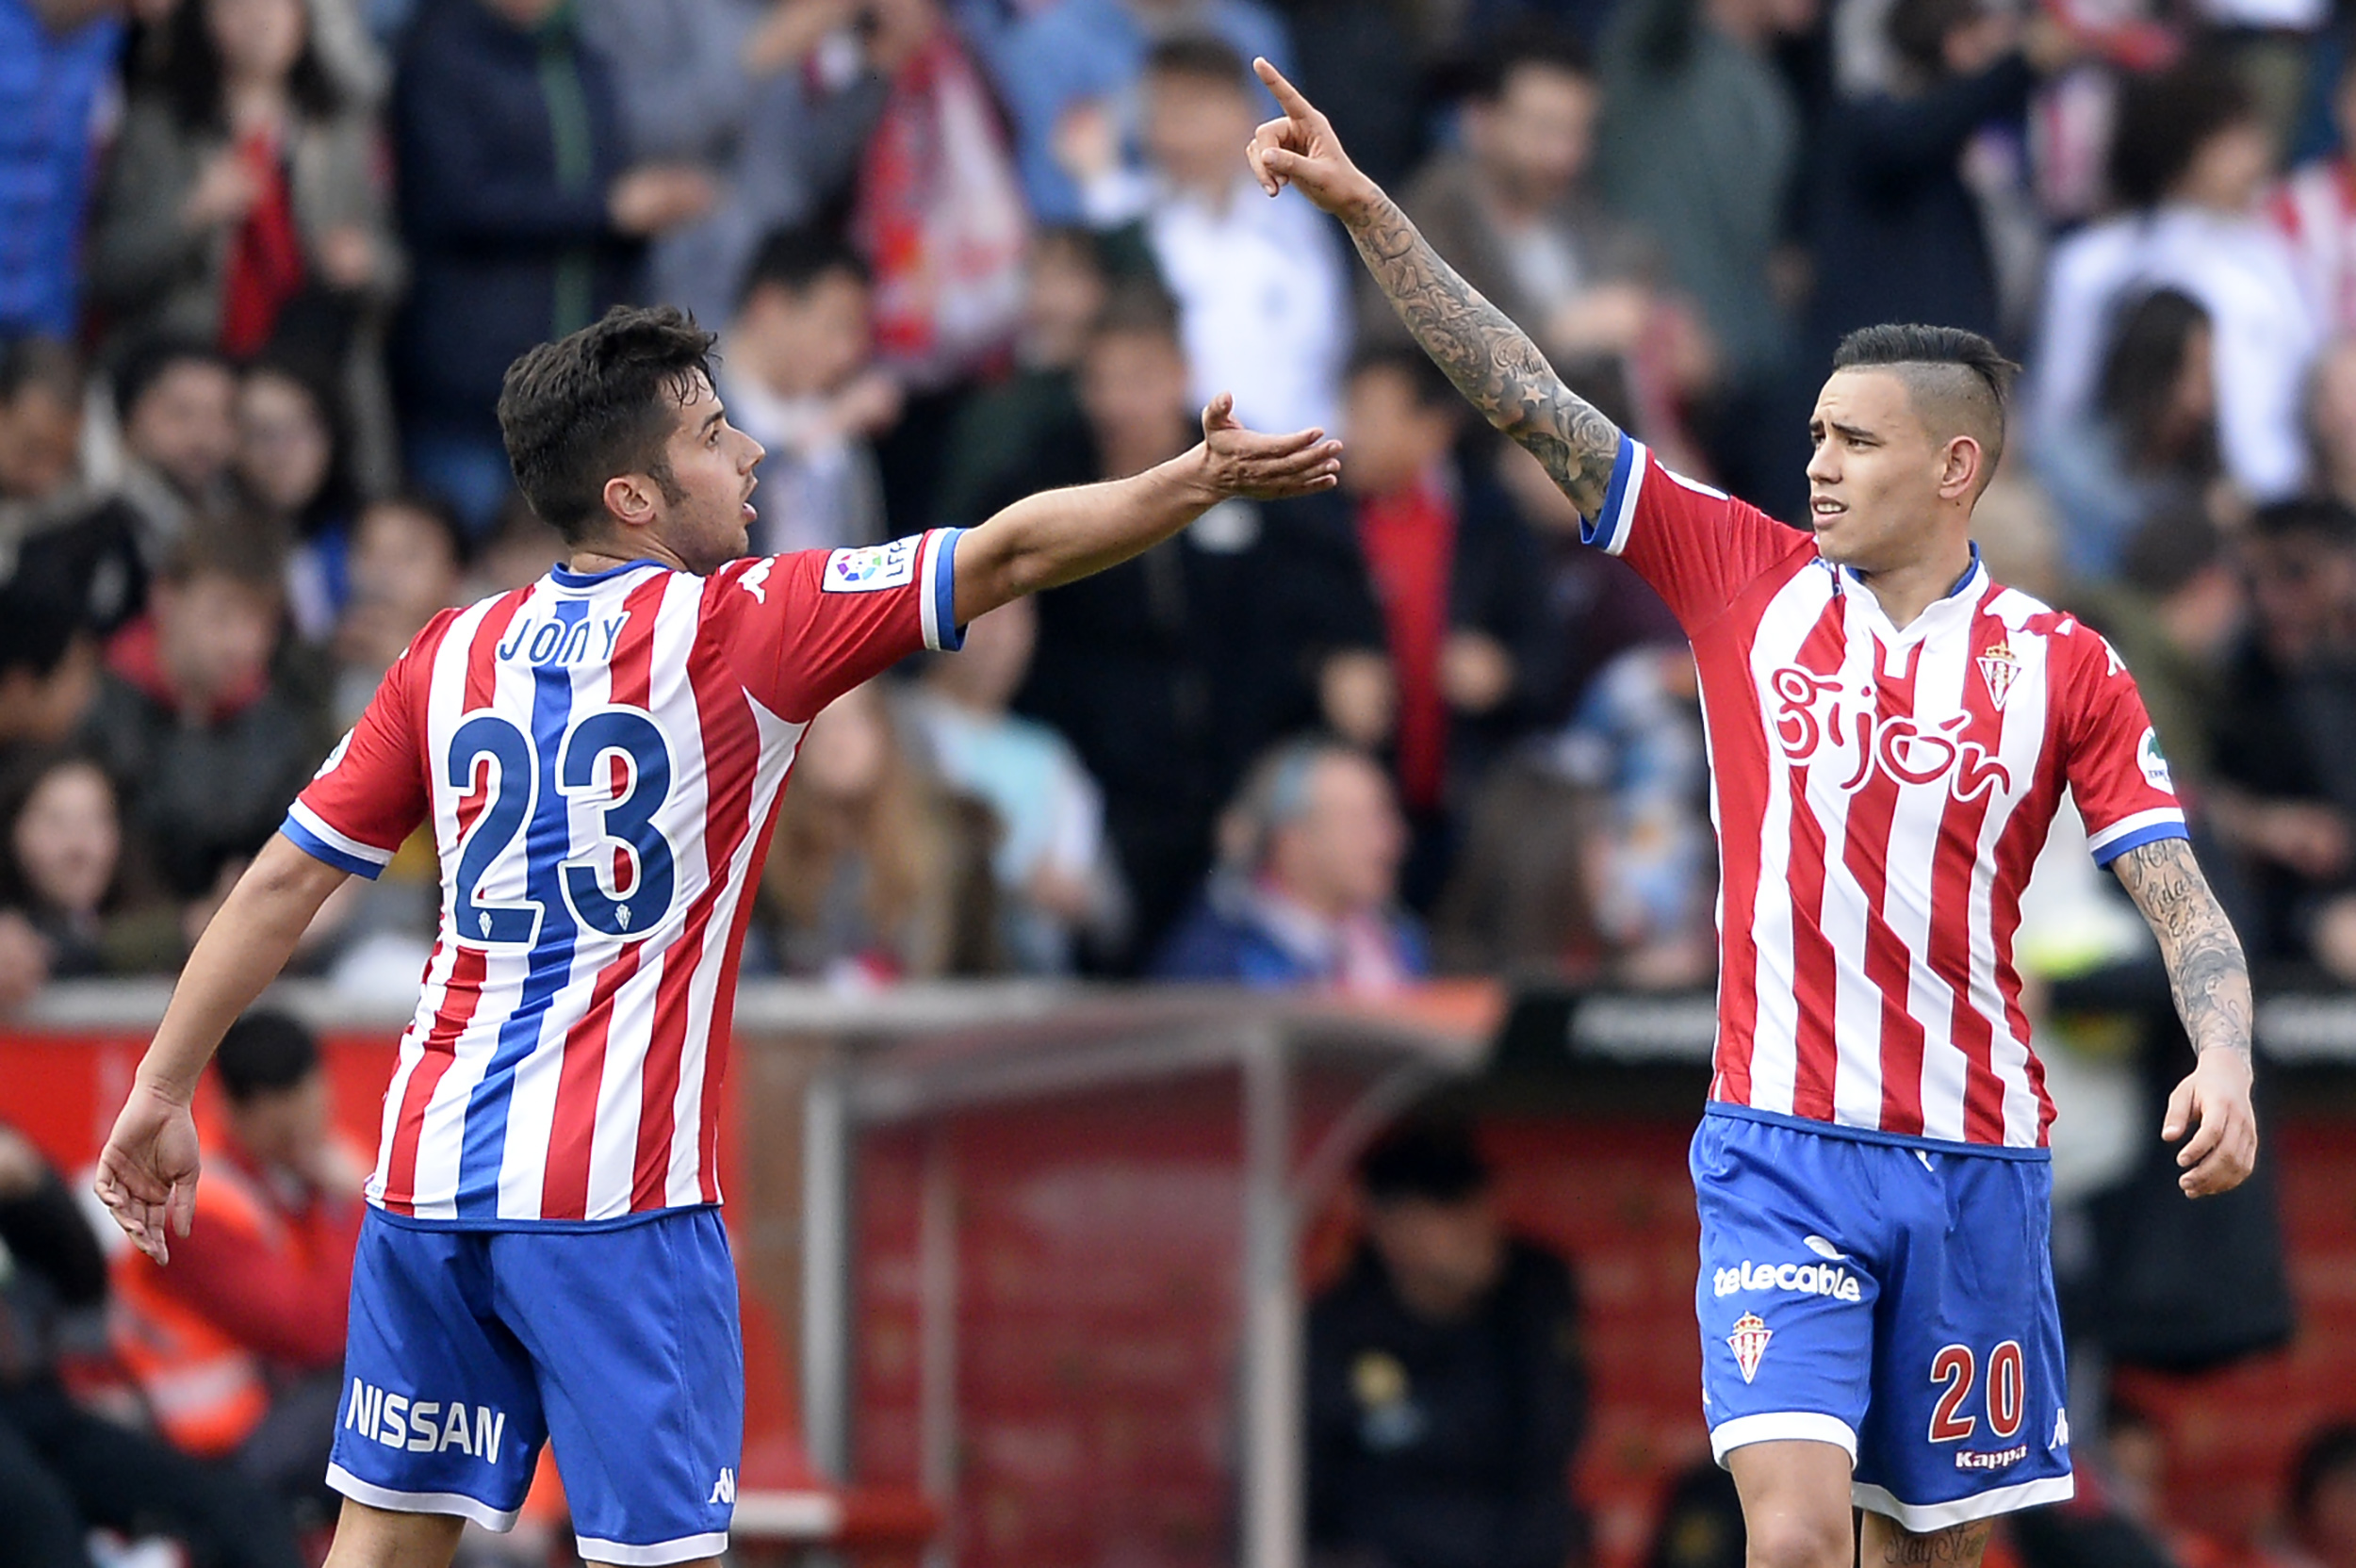 Sporting Gijon's Paraguayan forward Sanabria (R) celebrates after scoring a goal next to teammate Sporting Gijon's midfielder Jony during the Spanish league football match Real Sporting de Gijon vs Club Atletico de Madrid at El Molinon stadium in Gijon on March 19, 2016. Sporting won the match 2-1.  / AFP / MIGUEL RIOPA        (Photo credit should read MIGUEL RIOPA/AFP/Getty Images)